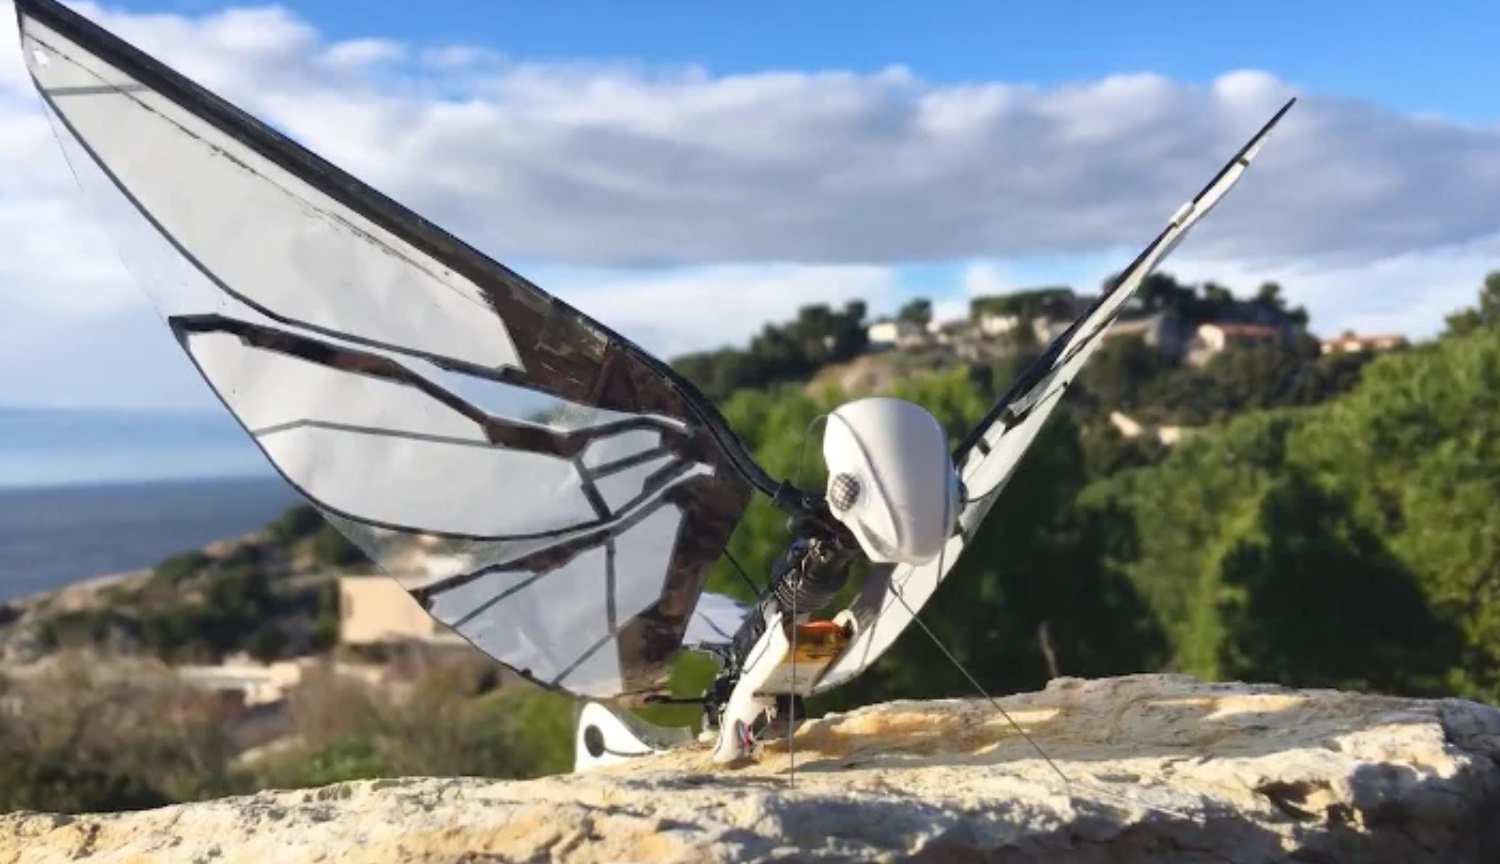 This robot is almost indistinguishable from live insects: see for yourself